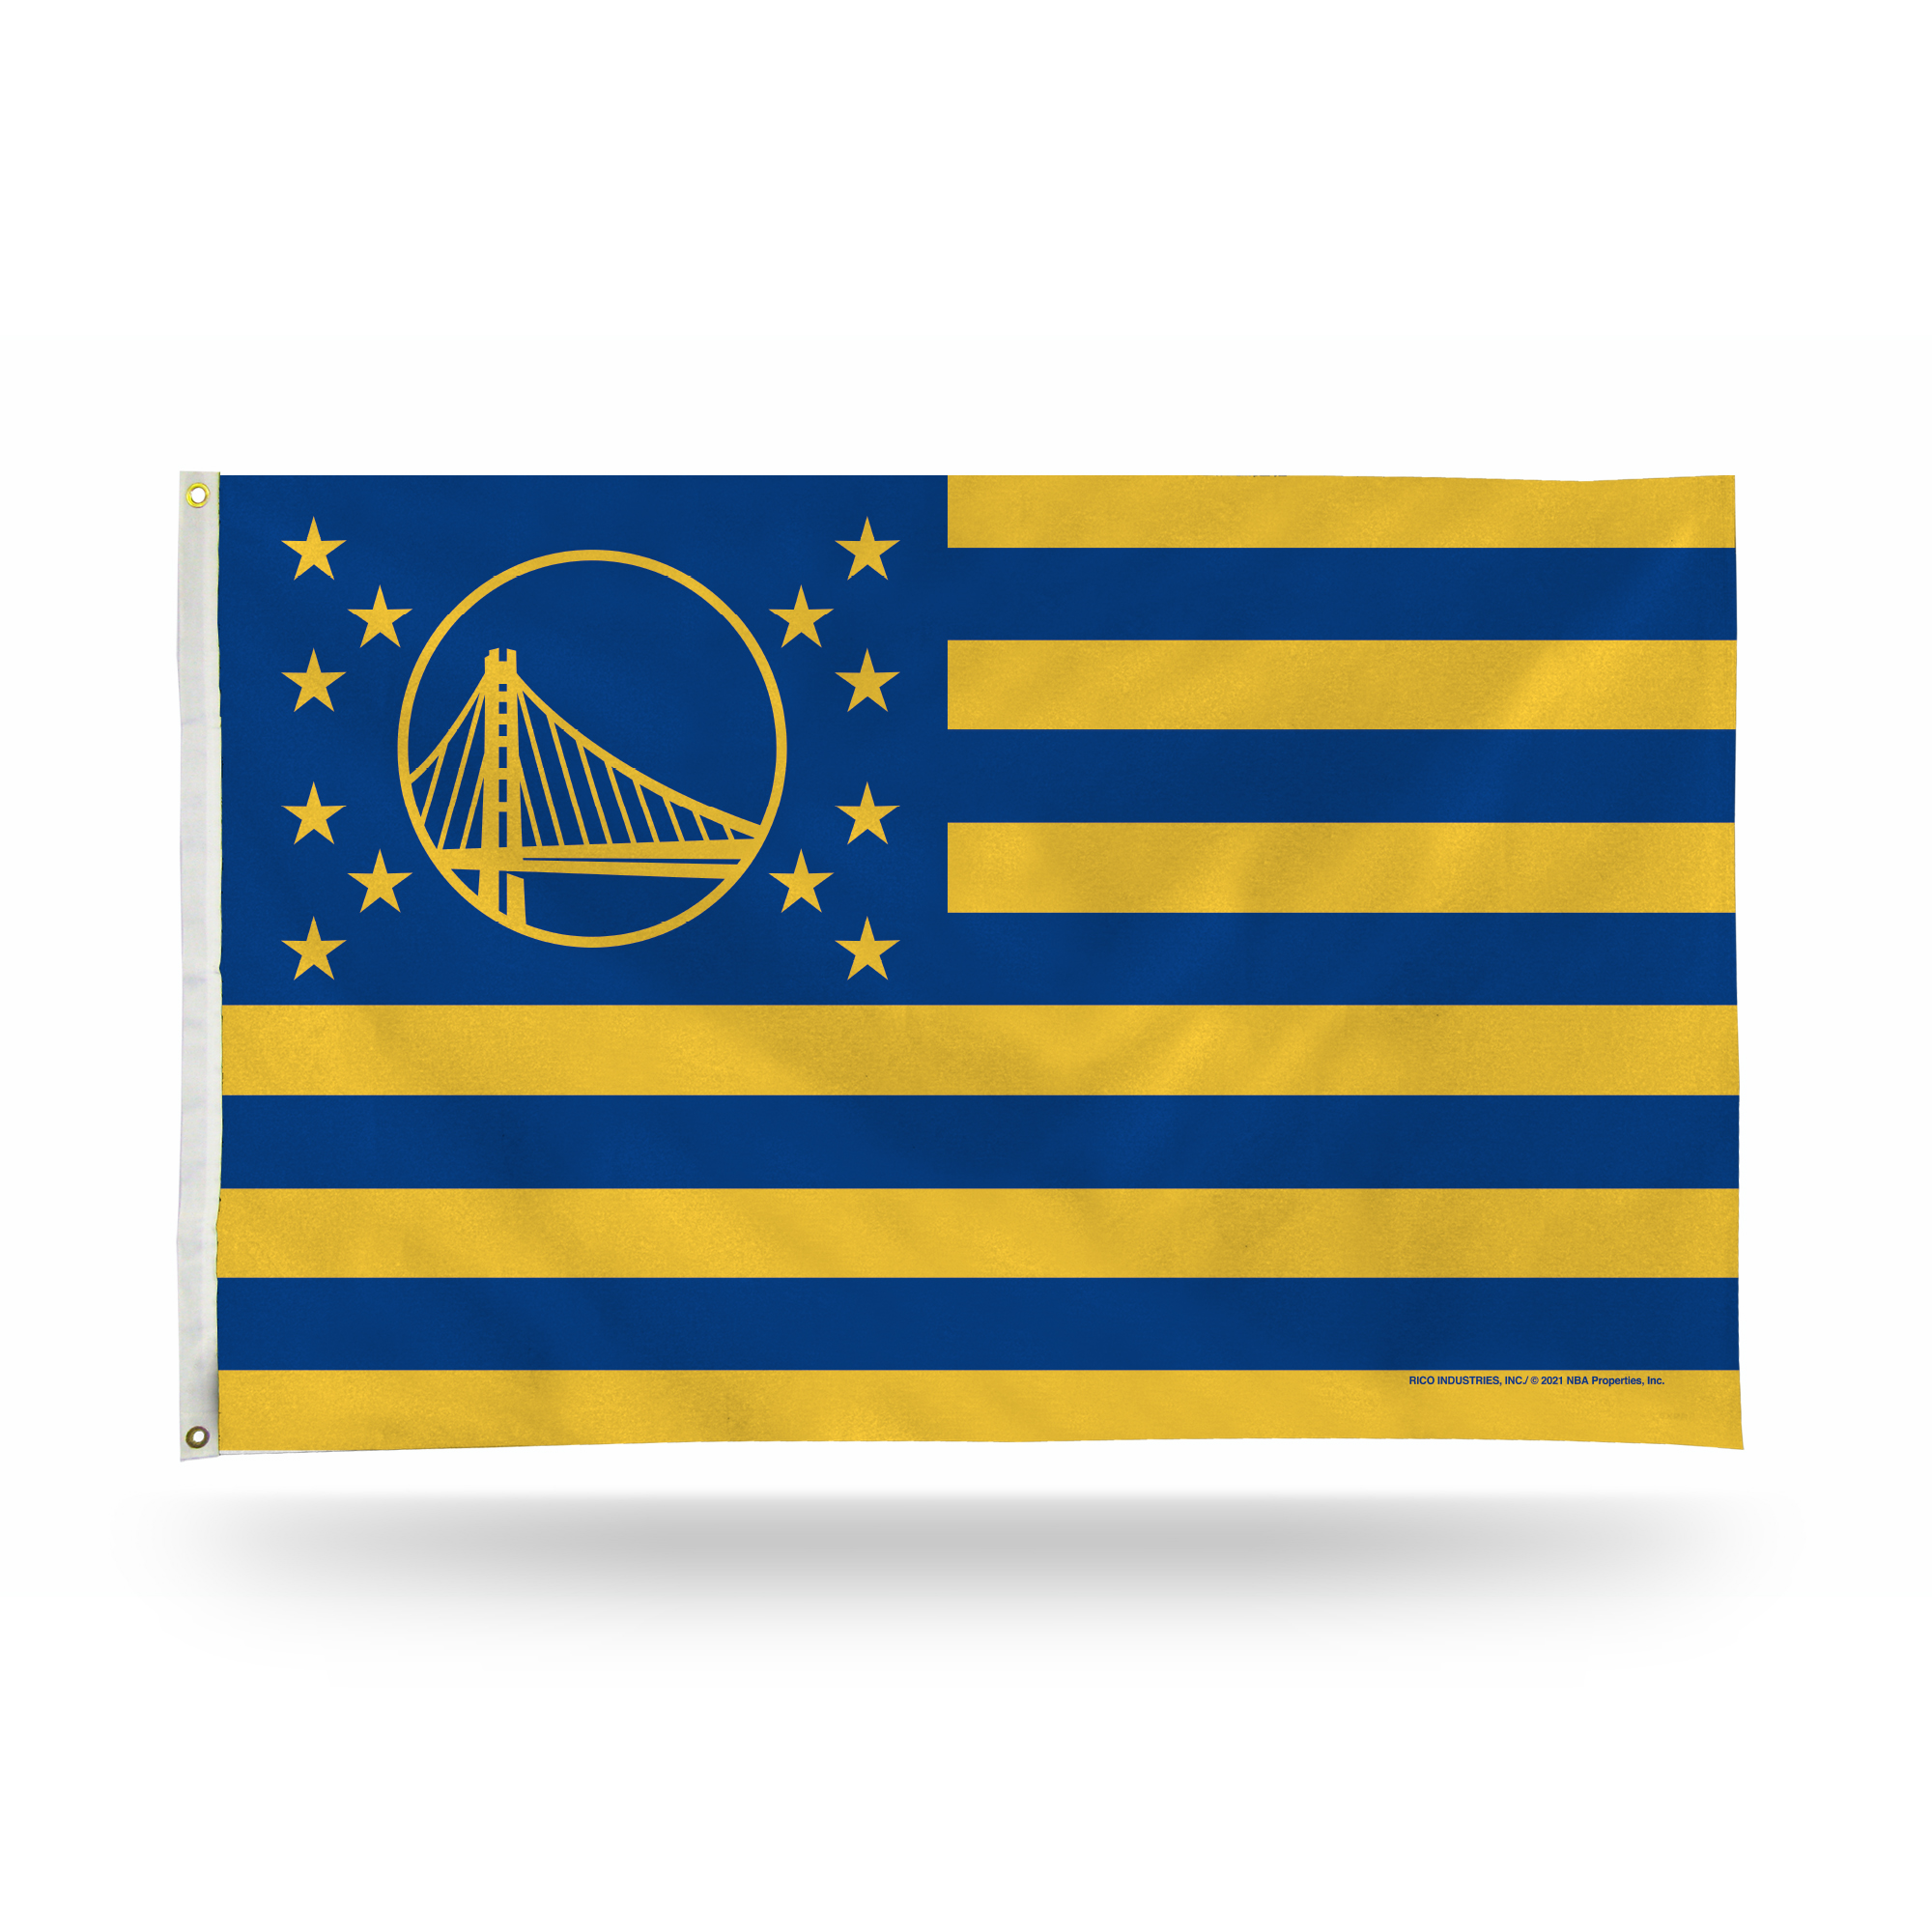 Rico Industries NBA Basketball Golden State Warriors Stars and Stripes 3' x 5' Banner Flag